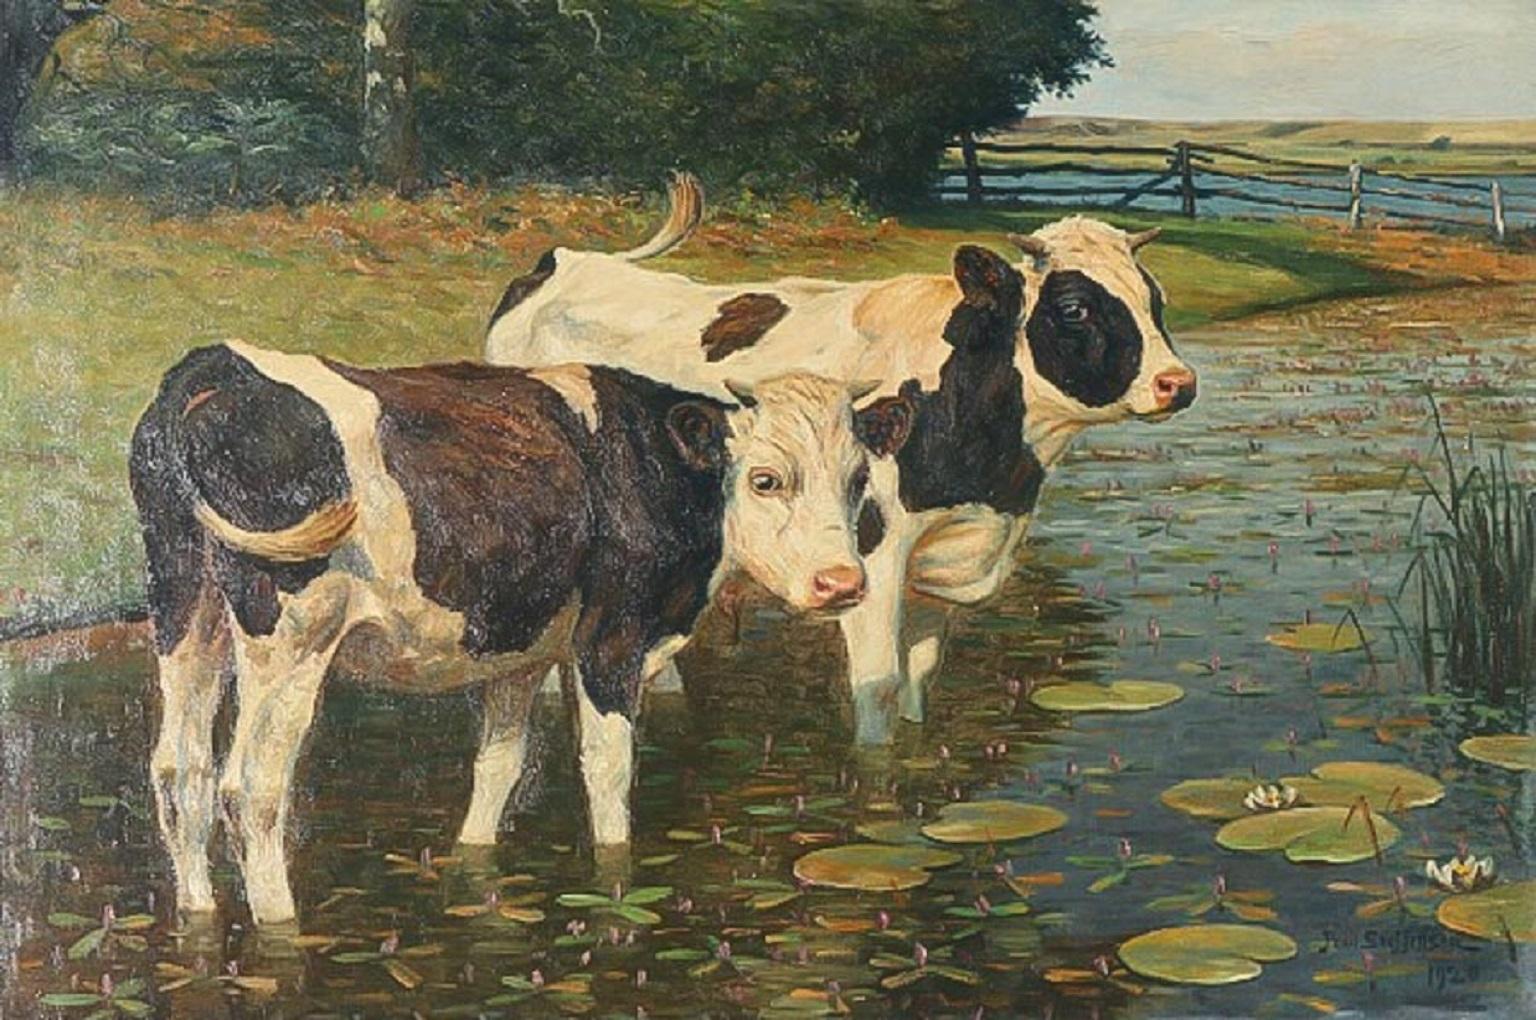 This delightful landscape oil on canvas painting depicts two black and white cows in a bucolic setting, standing in a pond surrounded by lily pads. It is not surprise that the painter is known for his realistic landscapes and animal paintings. Poul